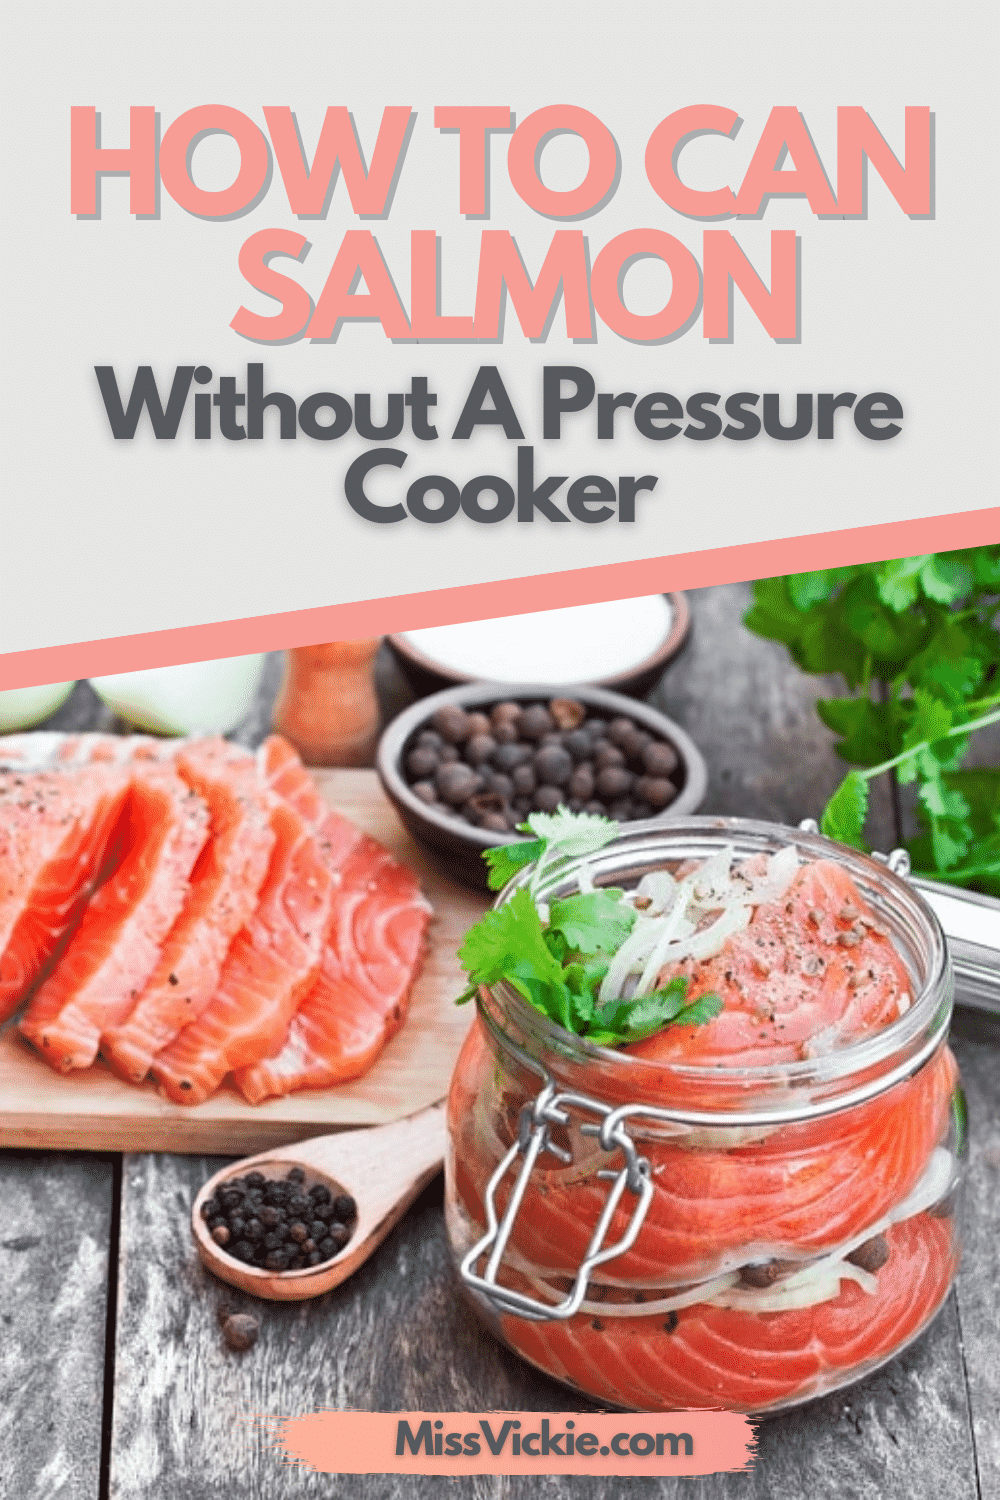 How To Can Salmon Without A Pressure Cooker